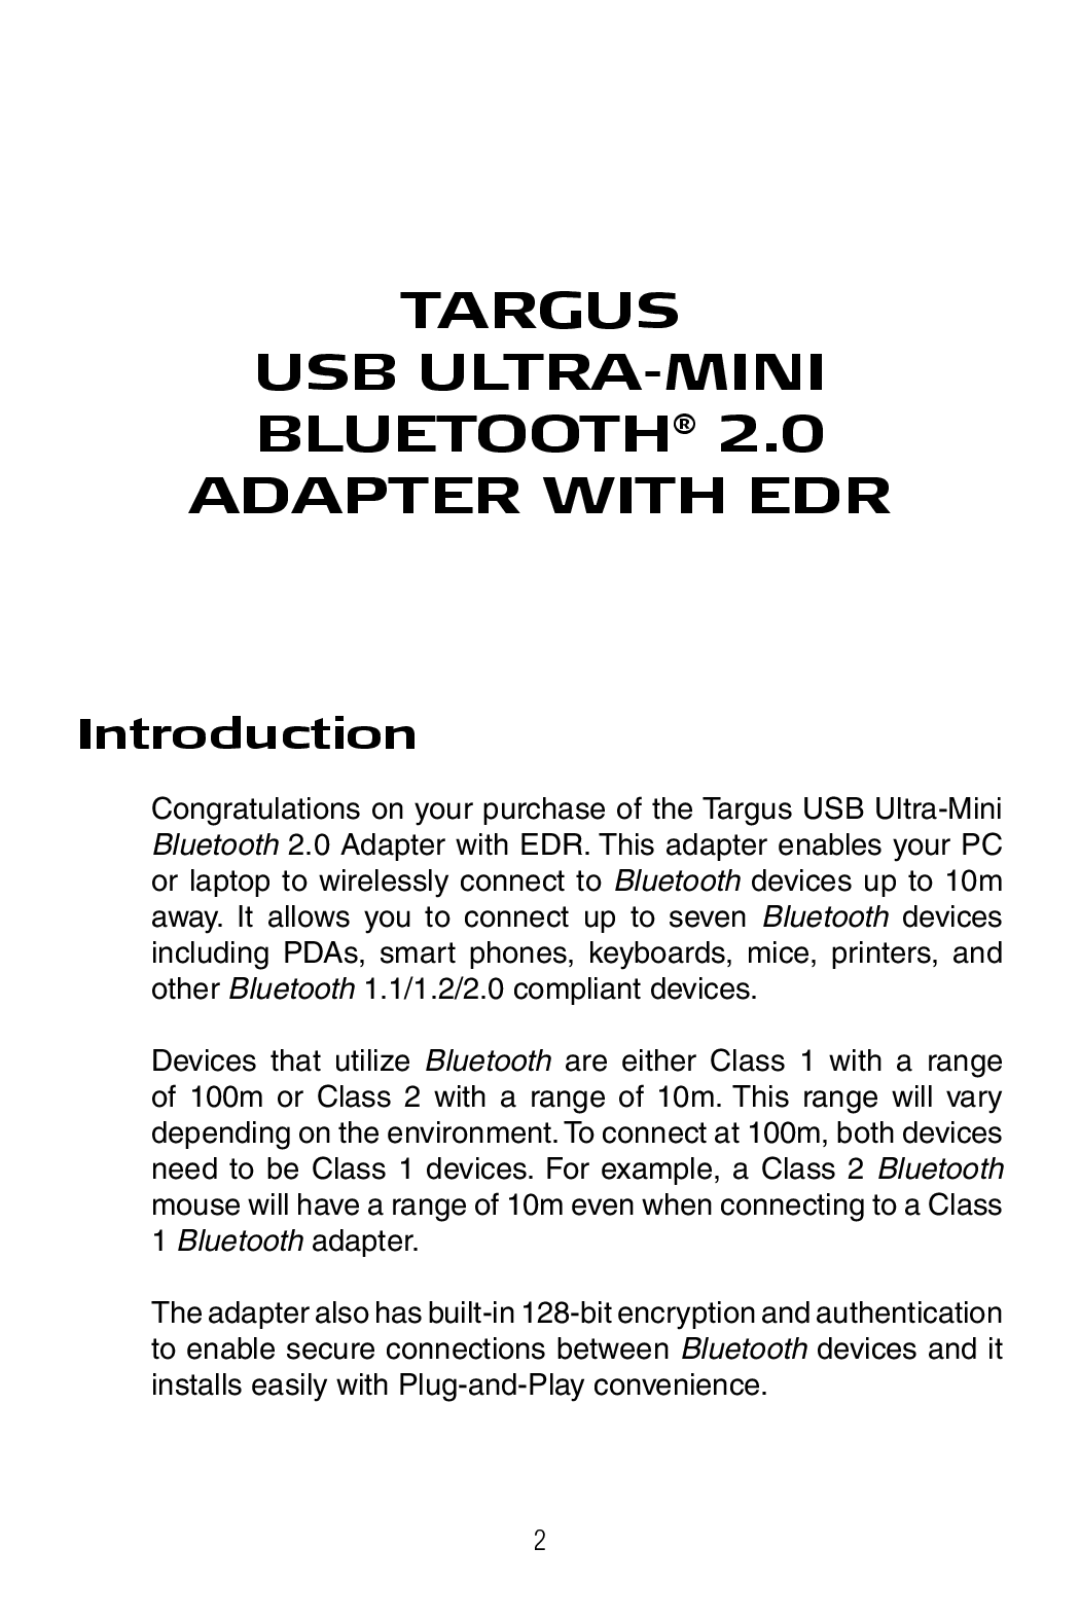 Targus Mini Bluetooth 2.0 Adapter with DER specifications Introduction, Targus Usb Ultra-Mini Bluetooth Adapter With Edr 